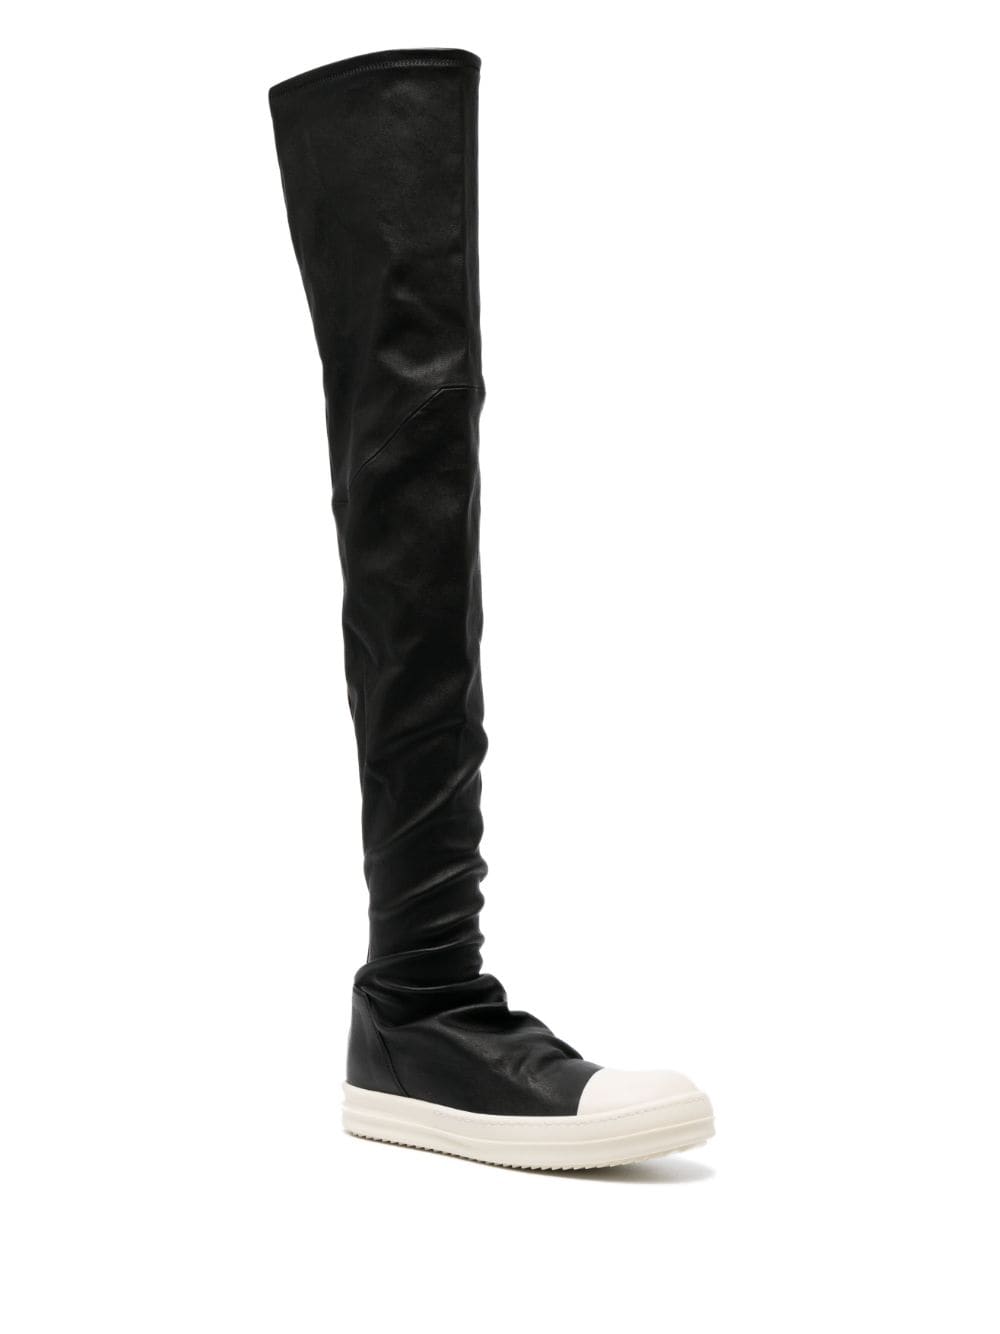 Rick Owens Stocking over-the-kee Boots - Farfetch